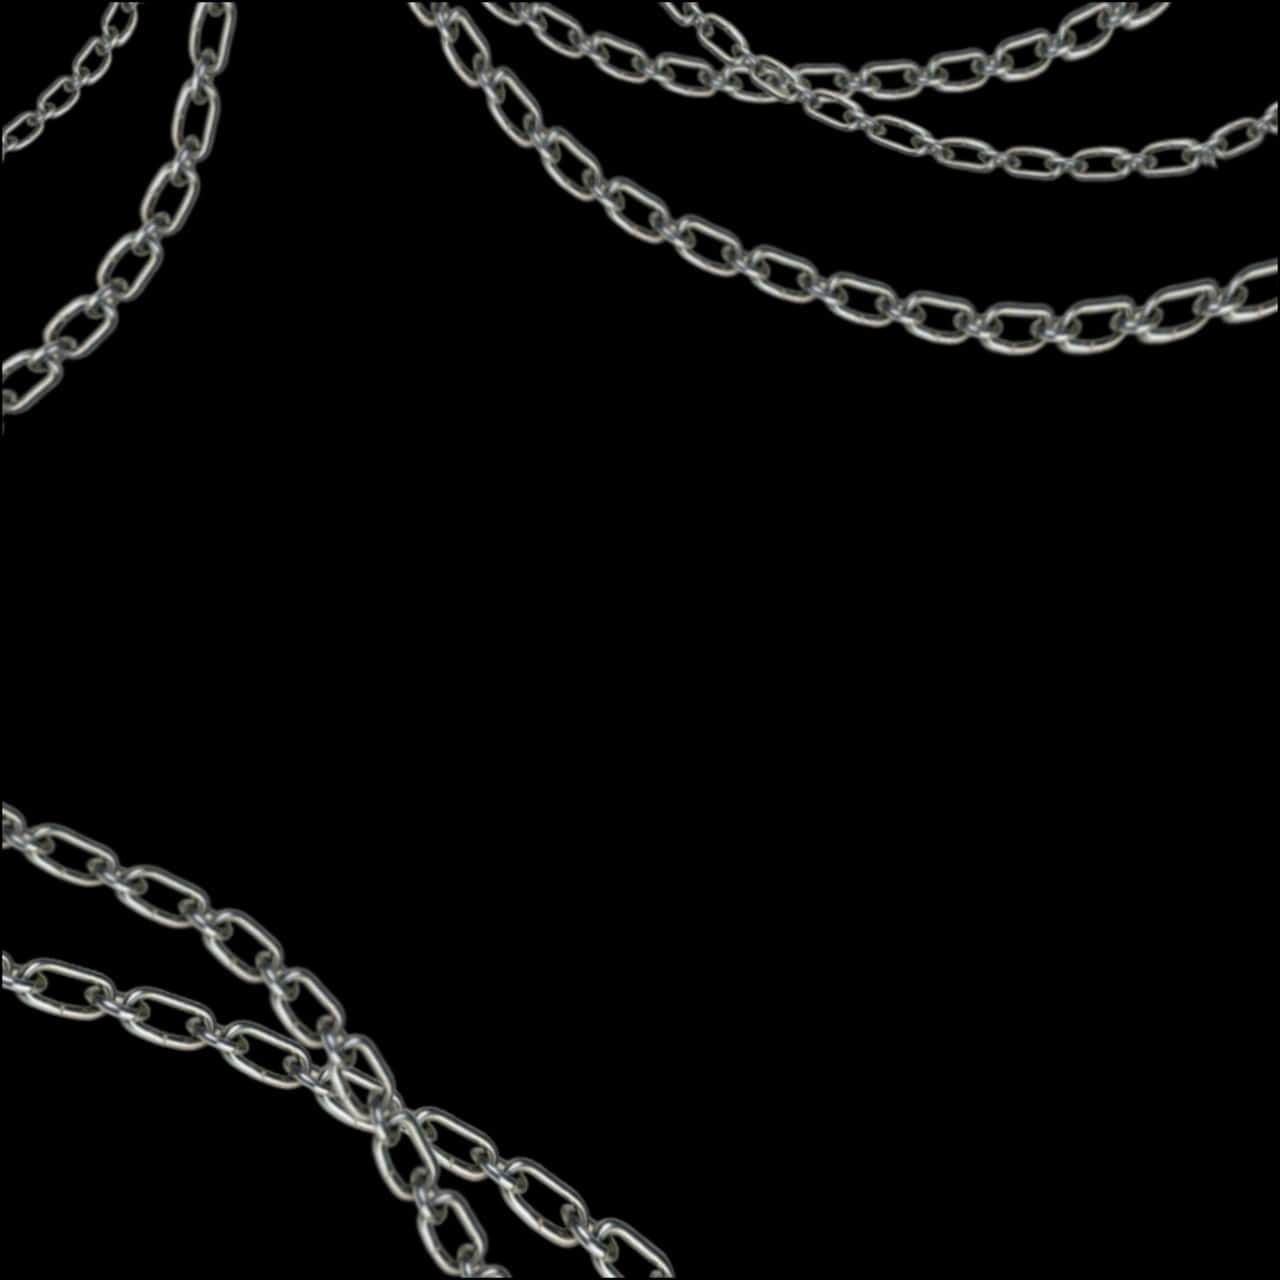 Silver Chains Black Background